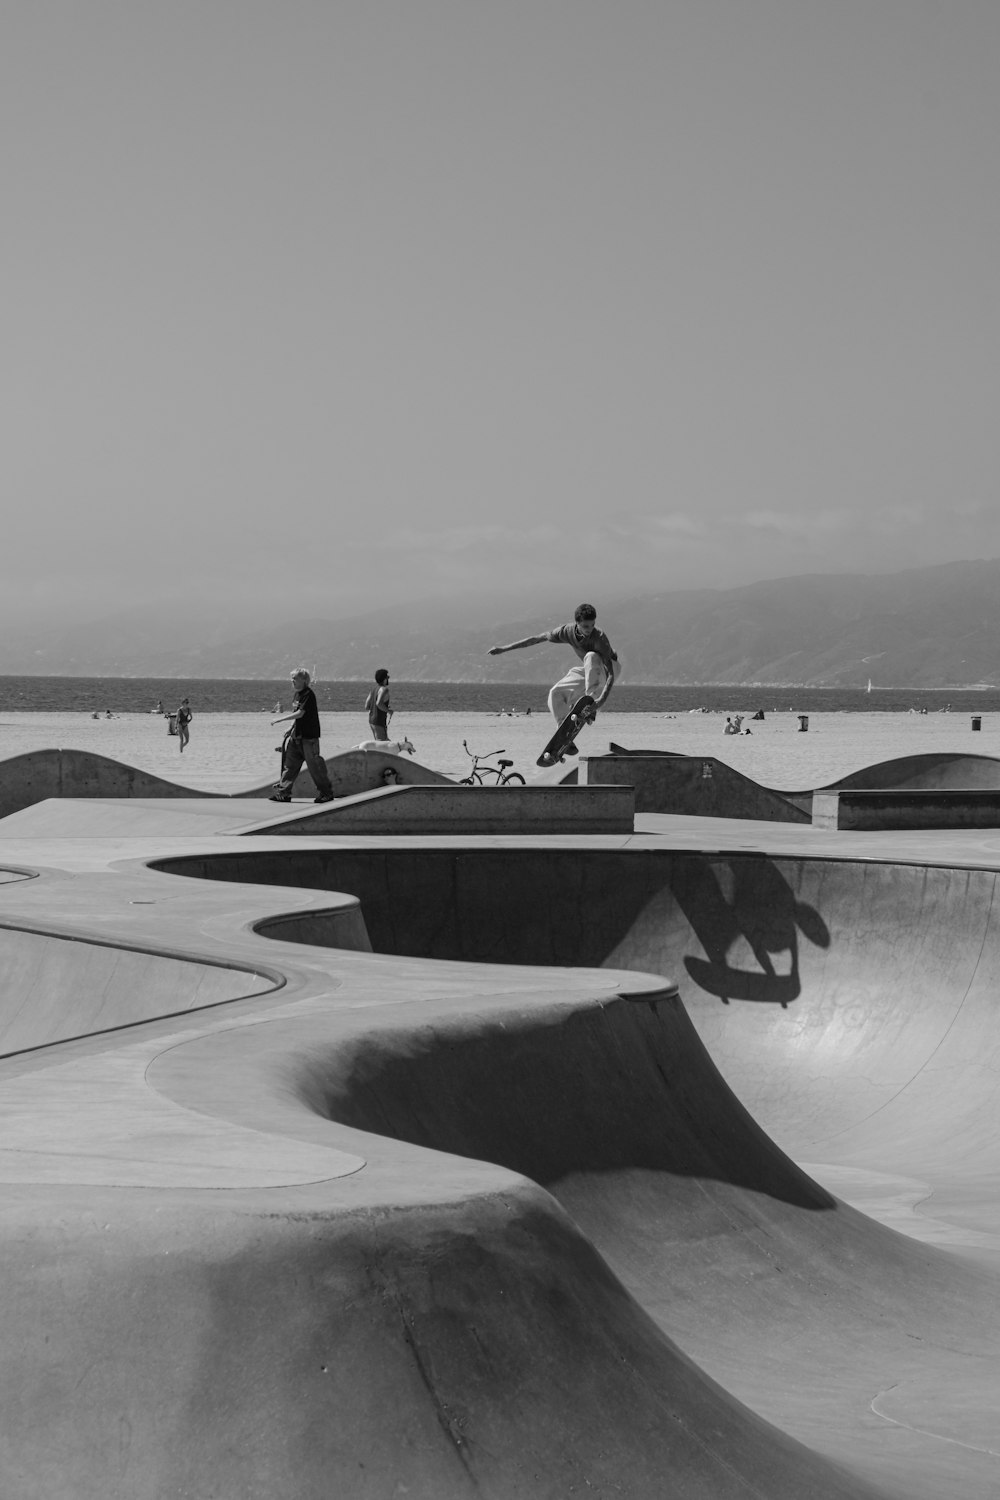 a group of people riding skateboards at a skate park